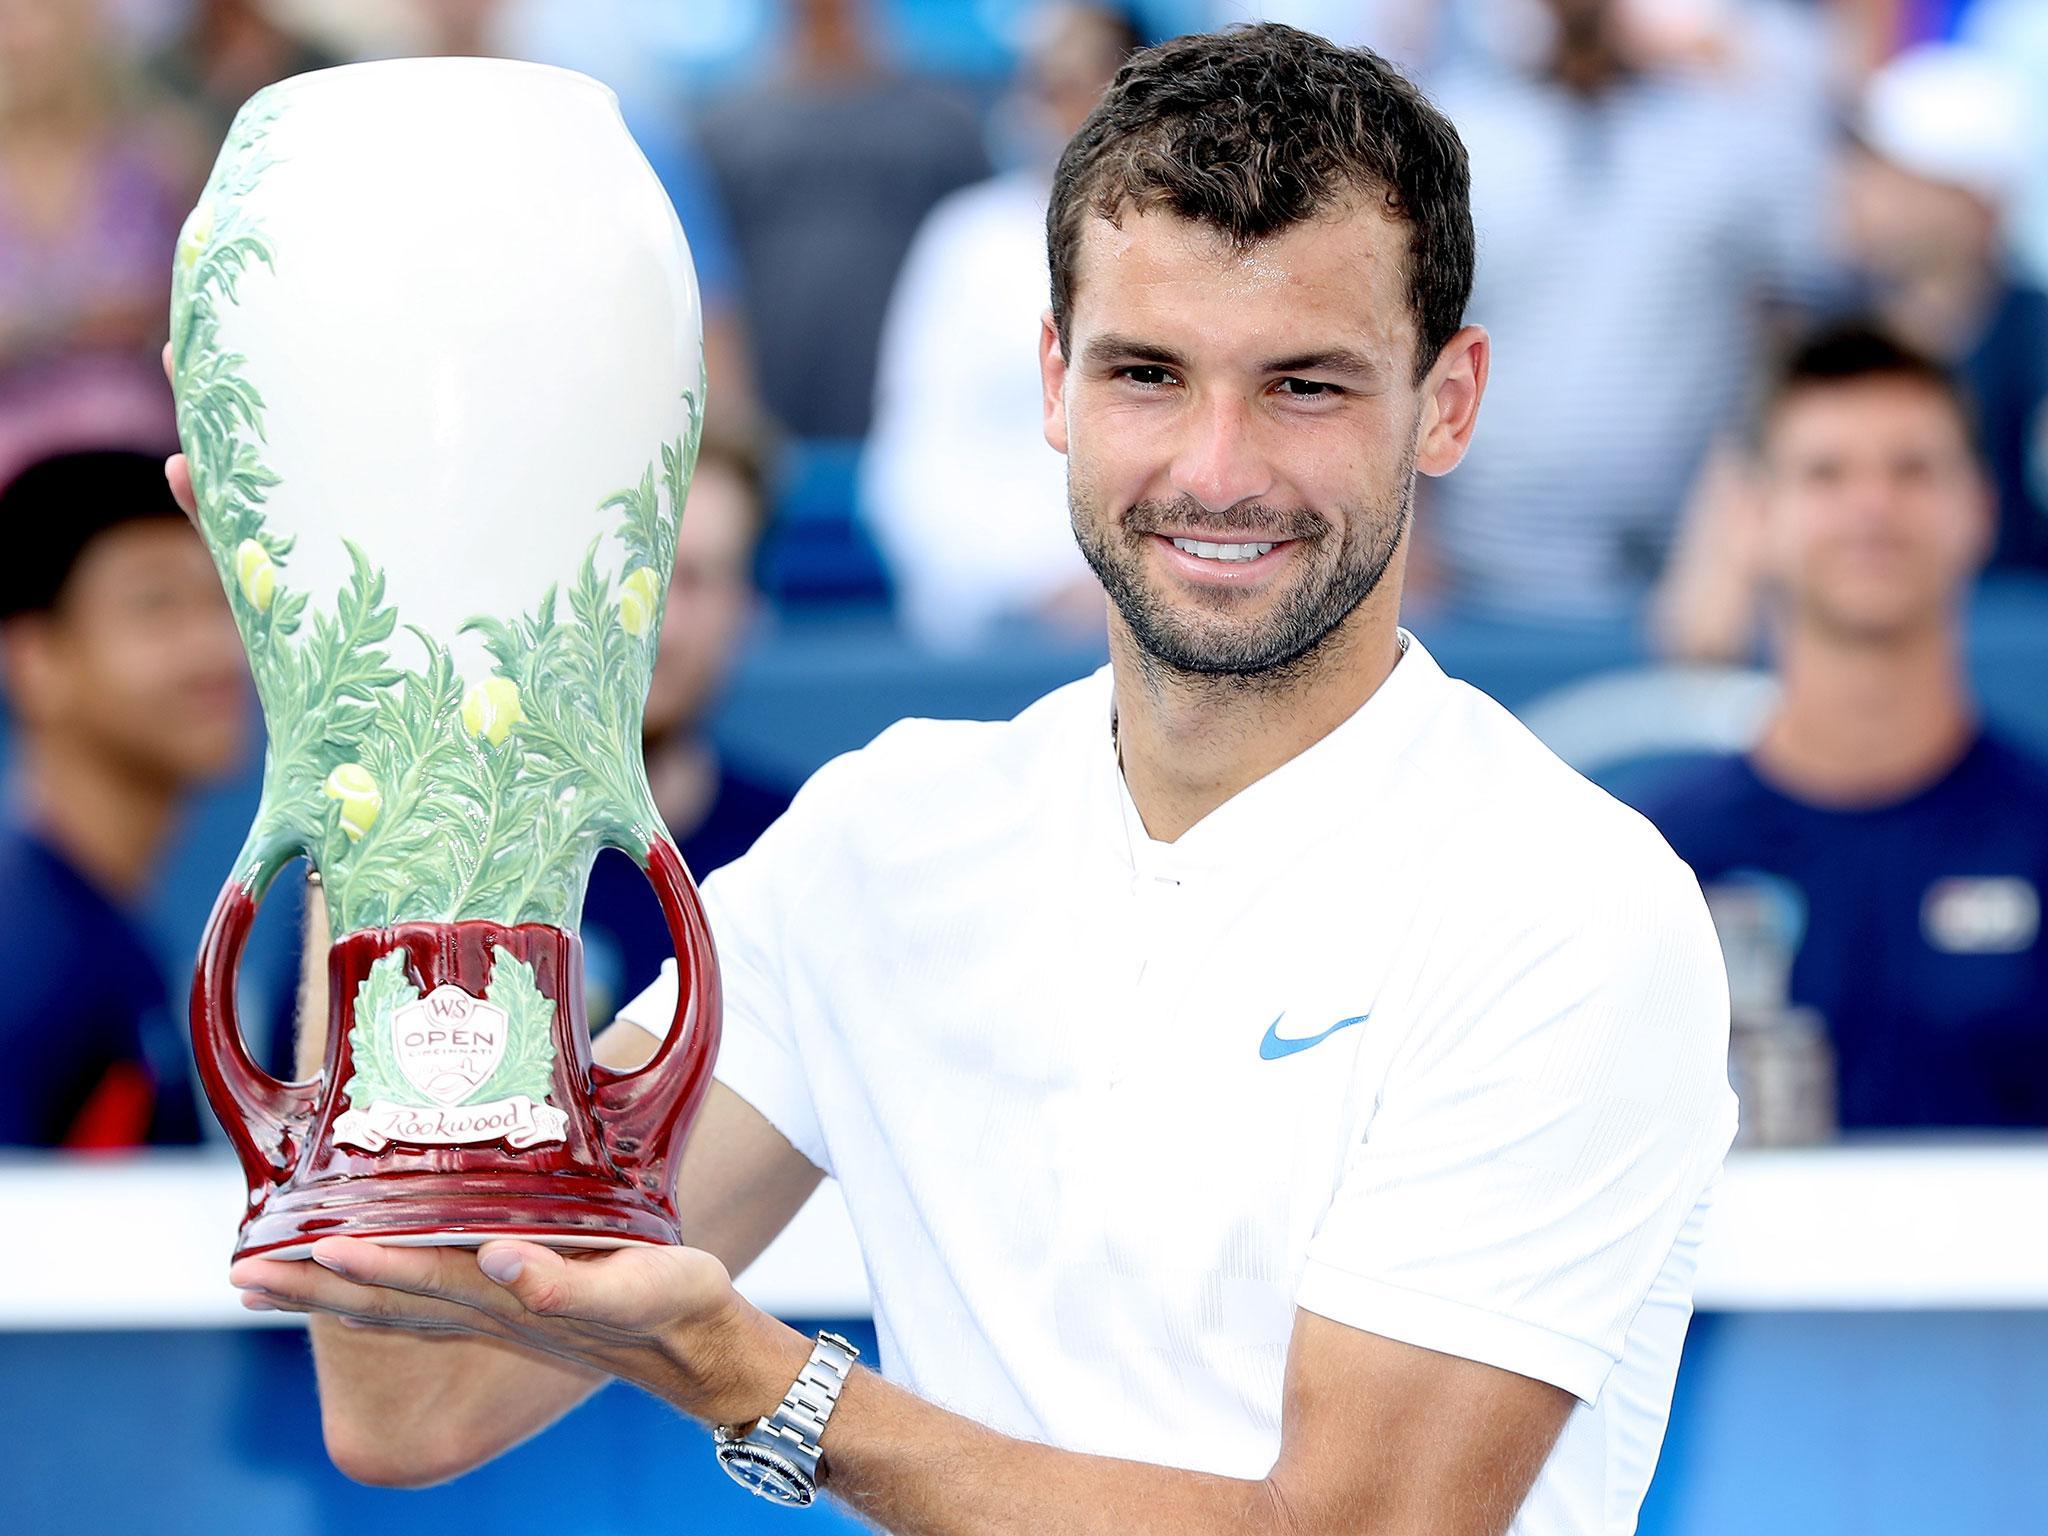 Grigor Dimitrov picked up his first-ever Masters title in Cincinnati